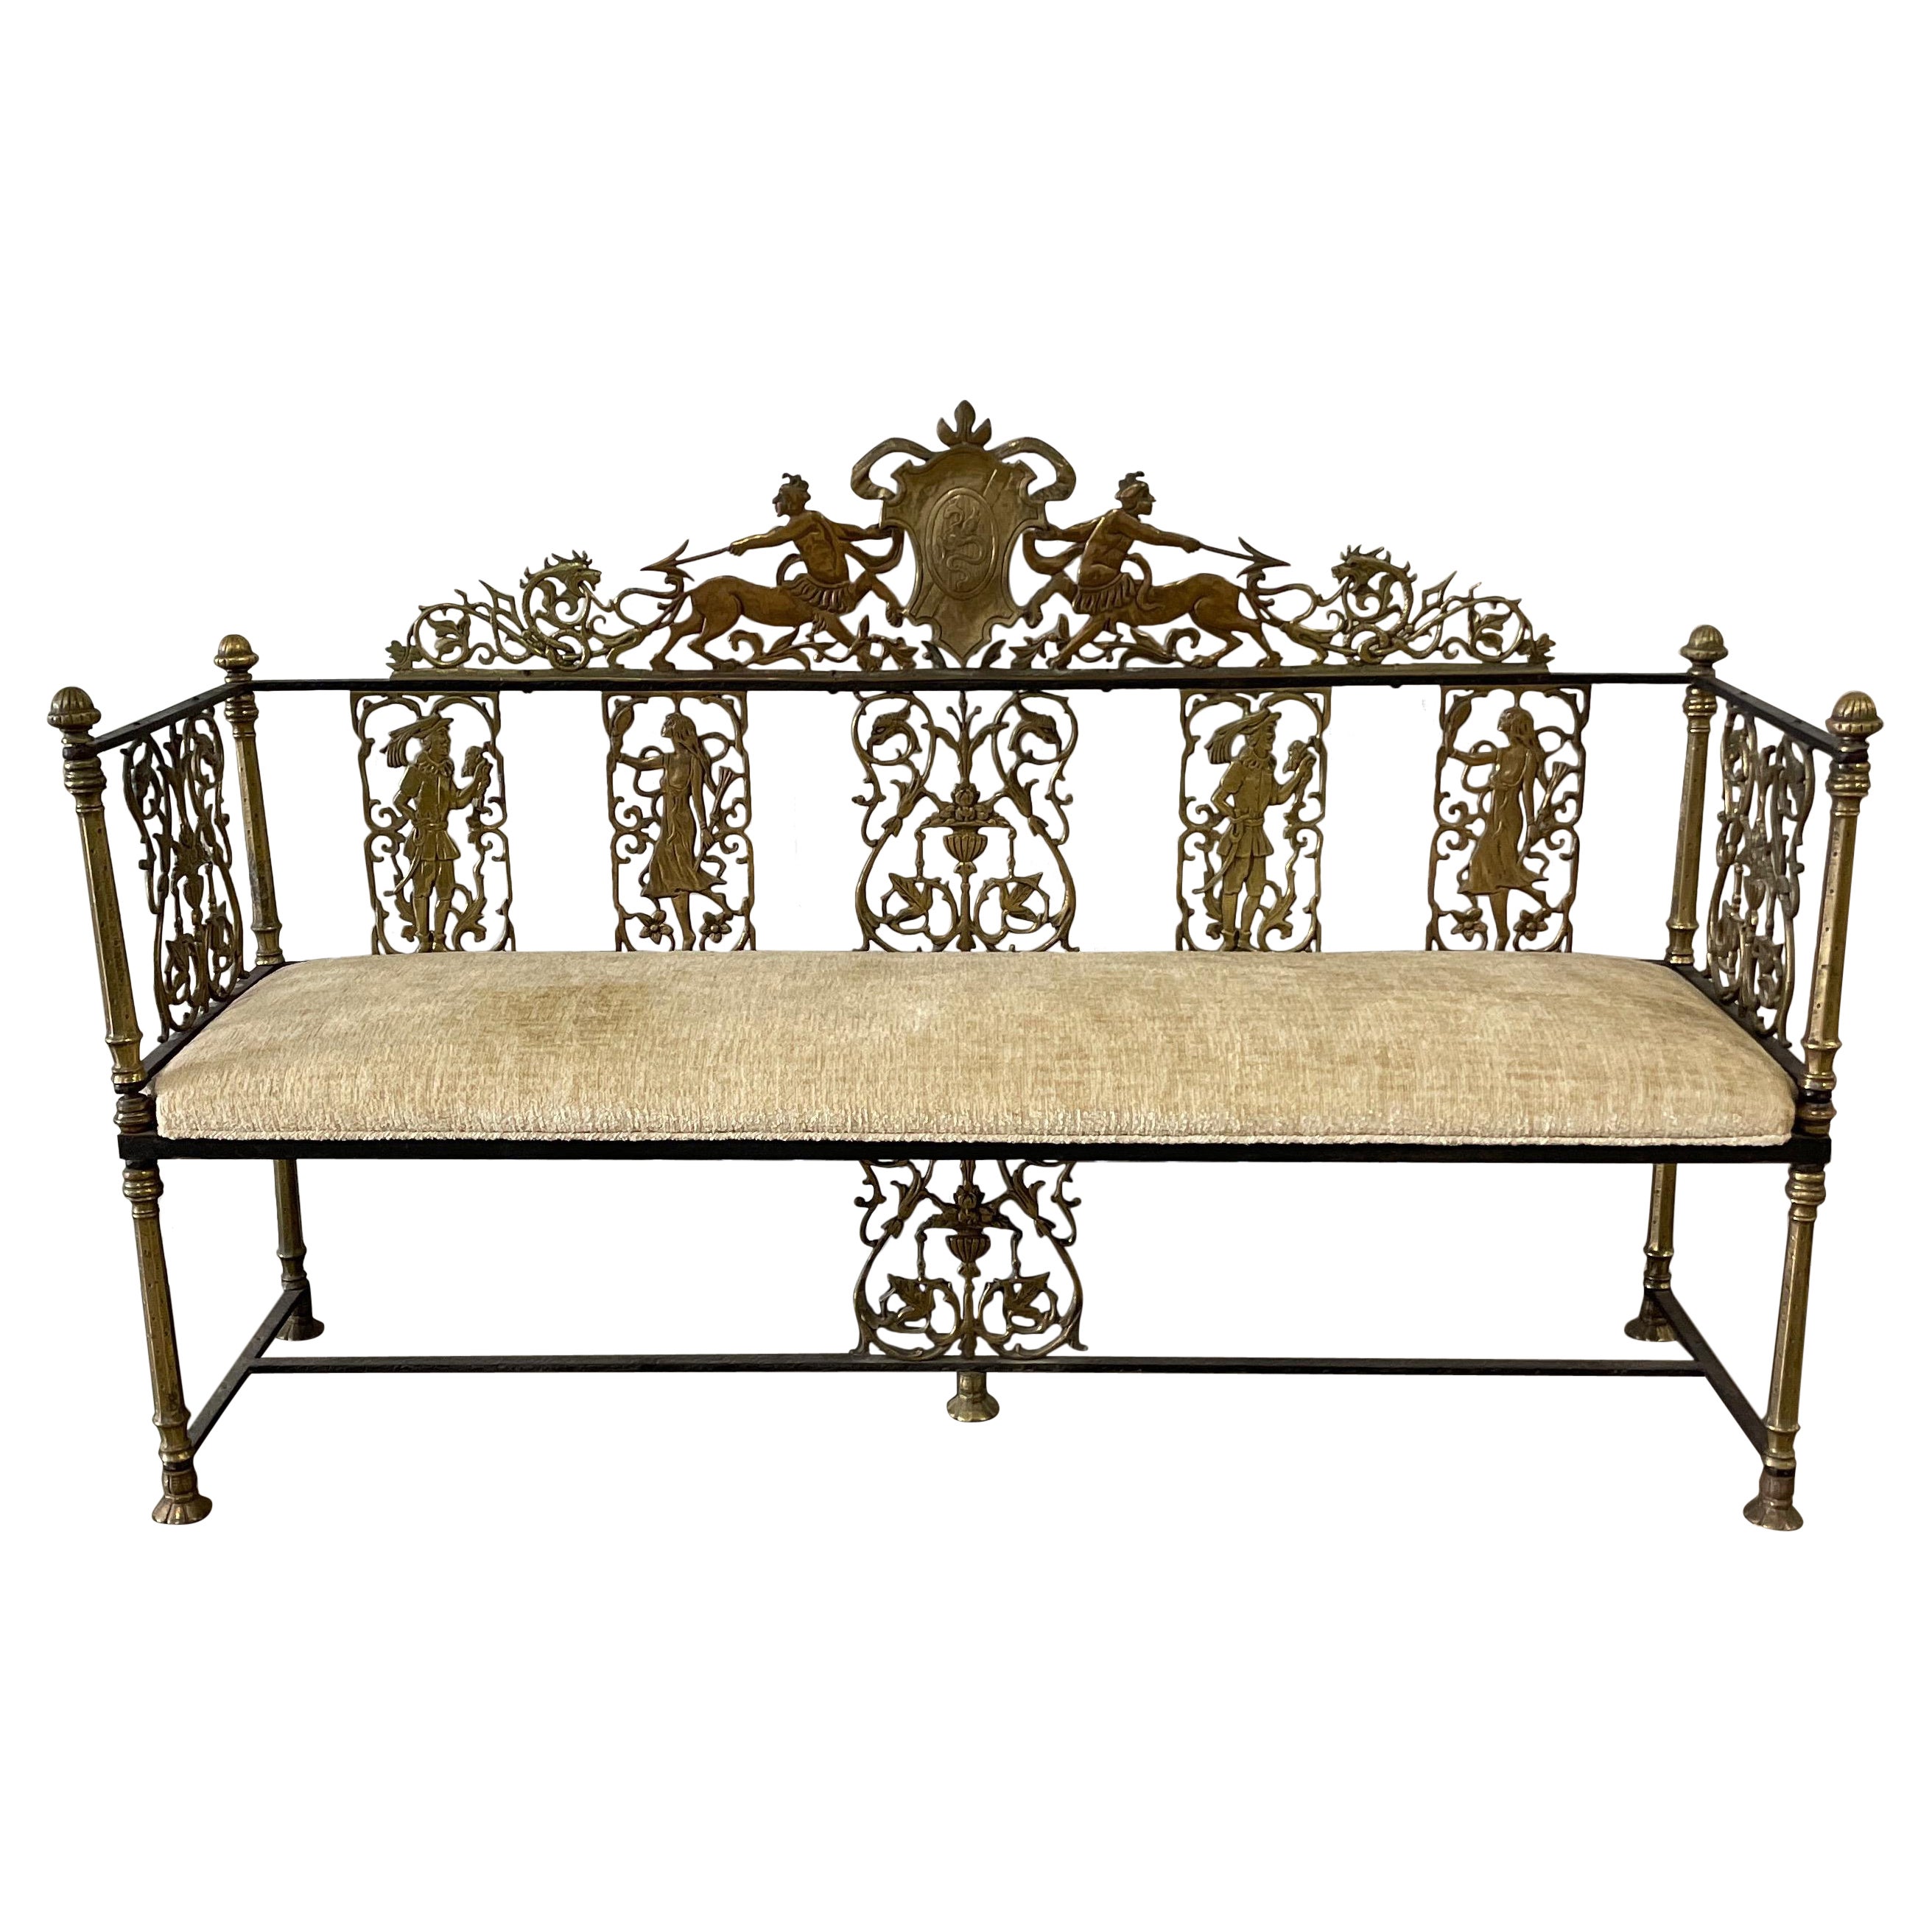 Neoclassical Brass & Wrought Iron Antique Bench For Sale